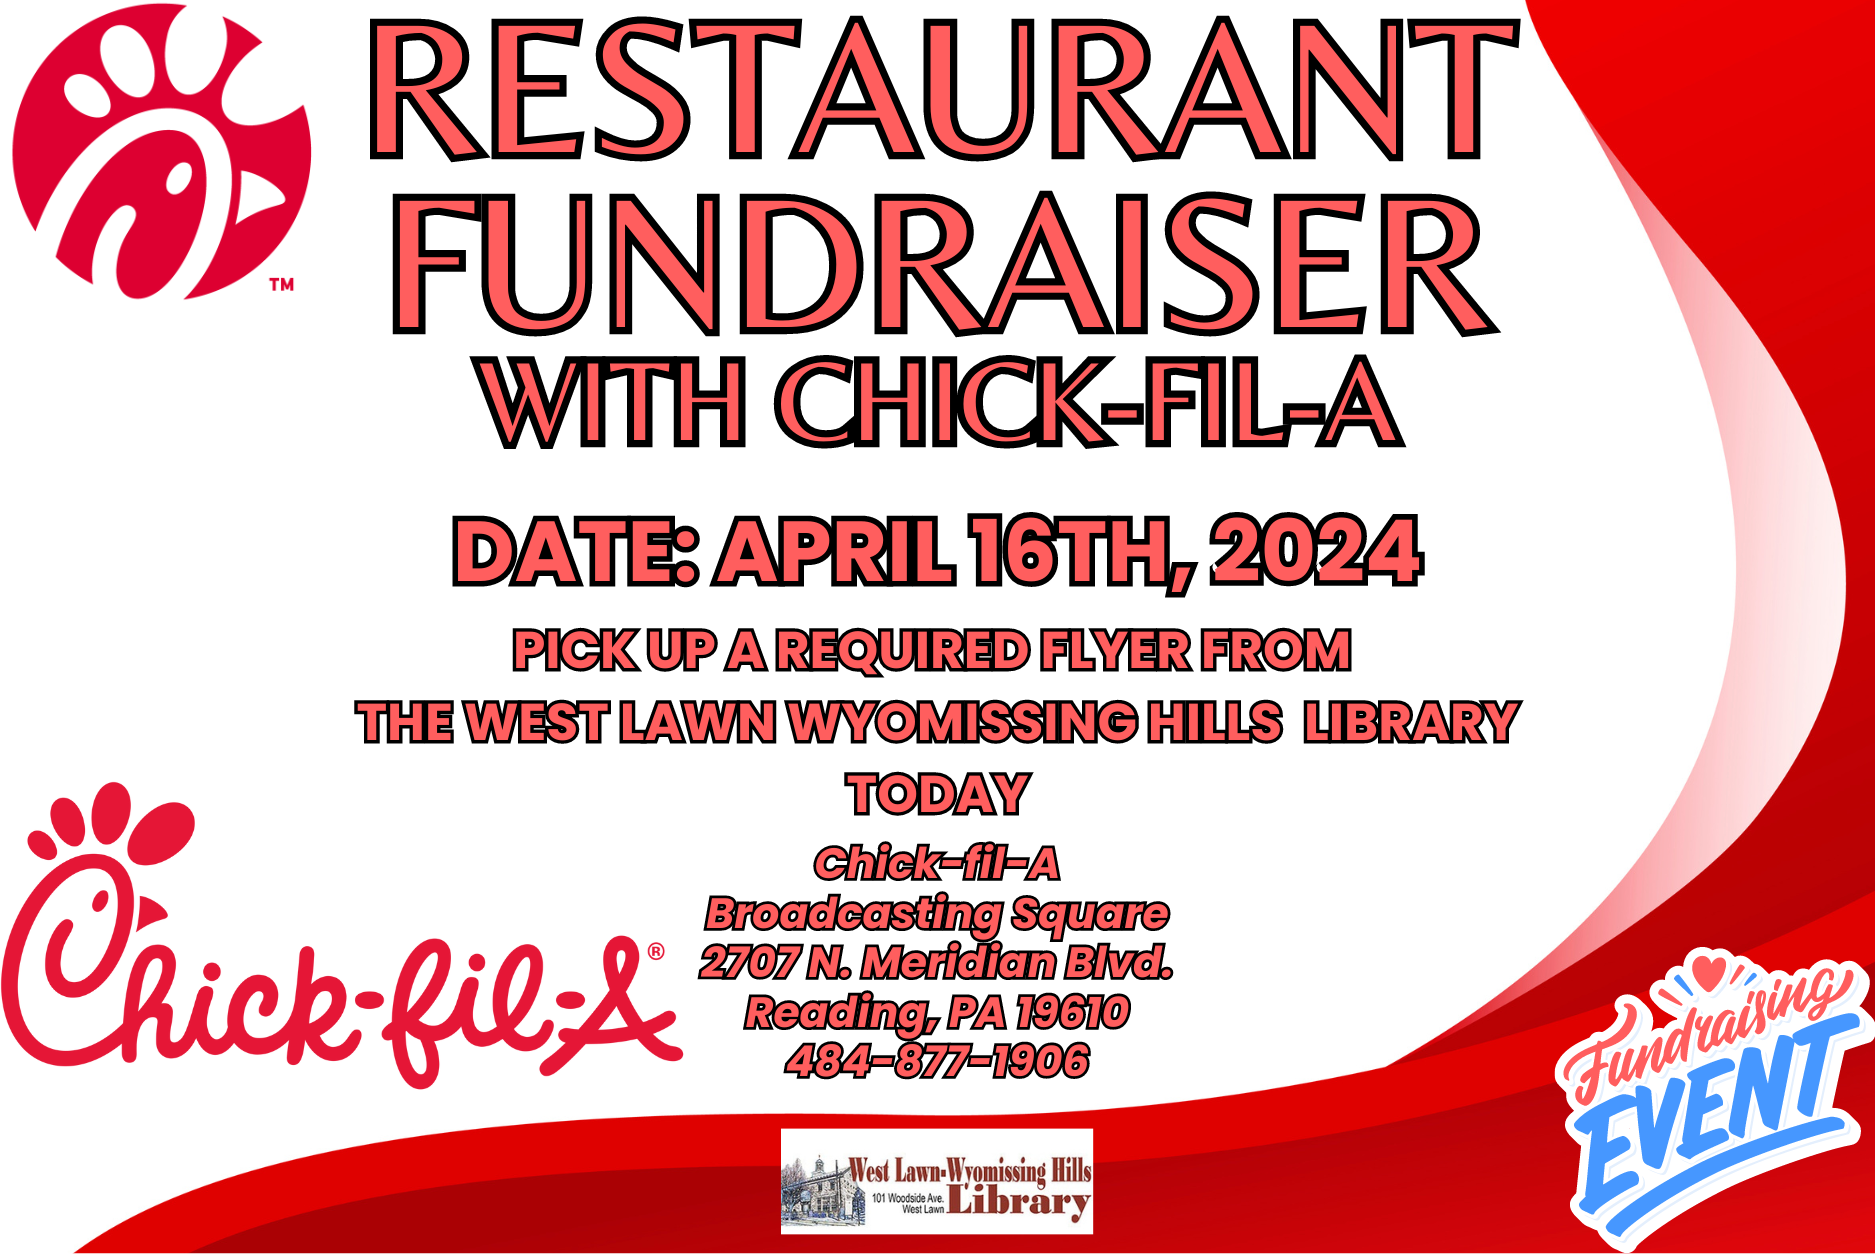 Restaurant Fundraiser With Chick-Fil-A